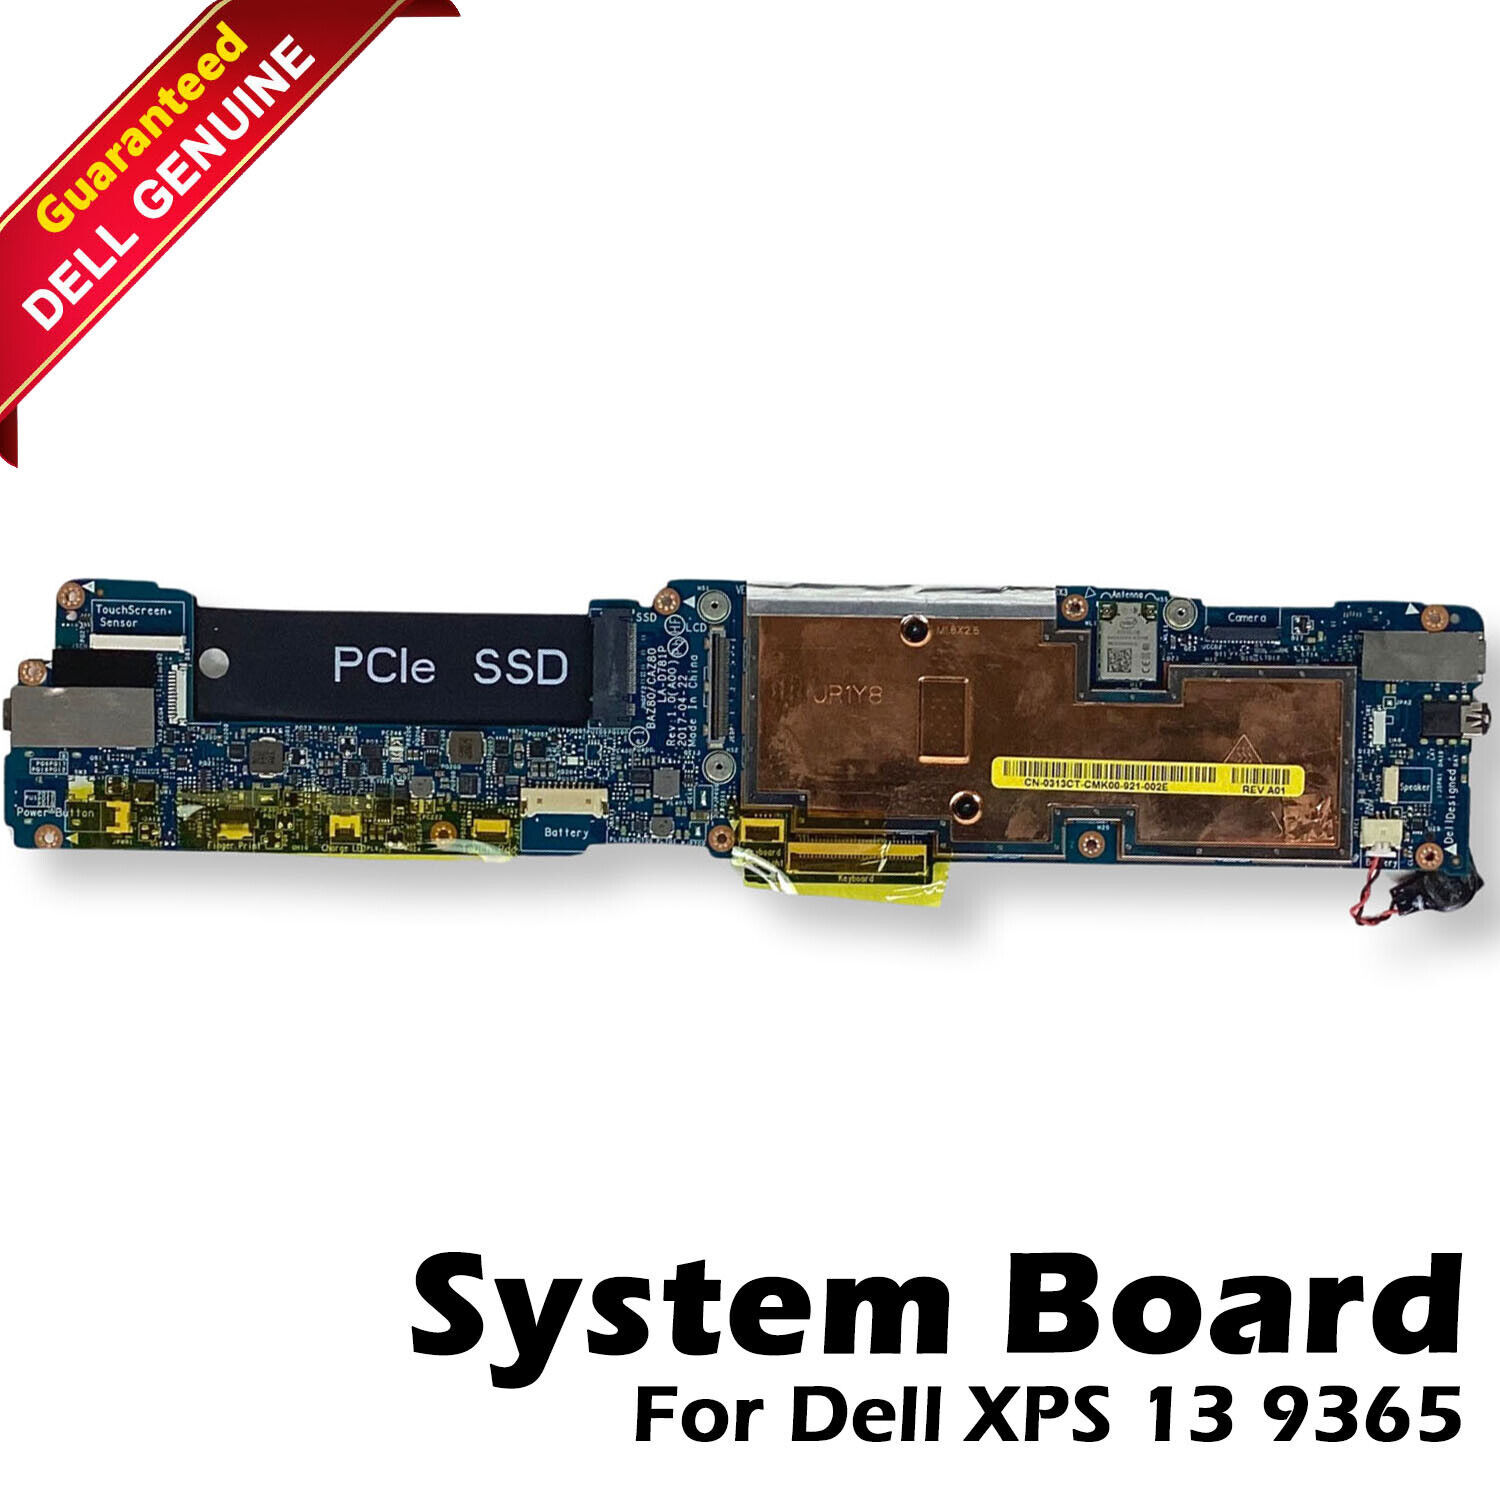 Dell OEM XPS 13 9365 Motherboard System Board with 1.2GHz Intel i5 CPU 8GB 313CT